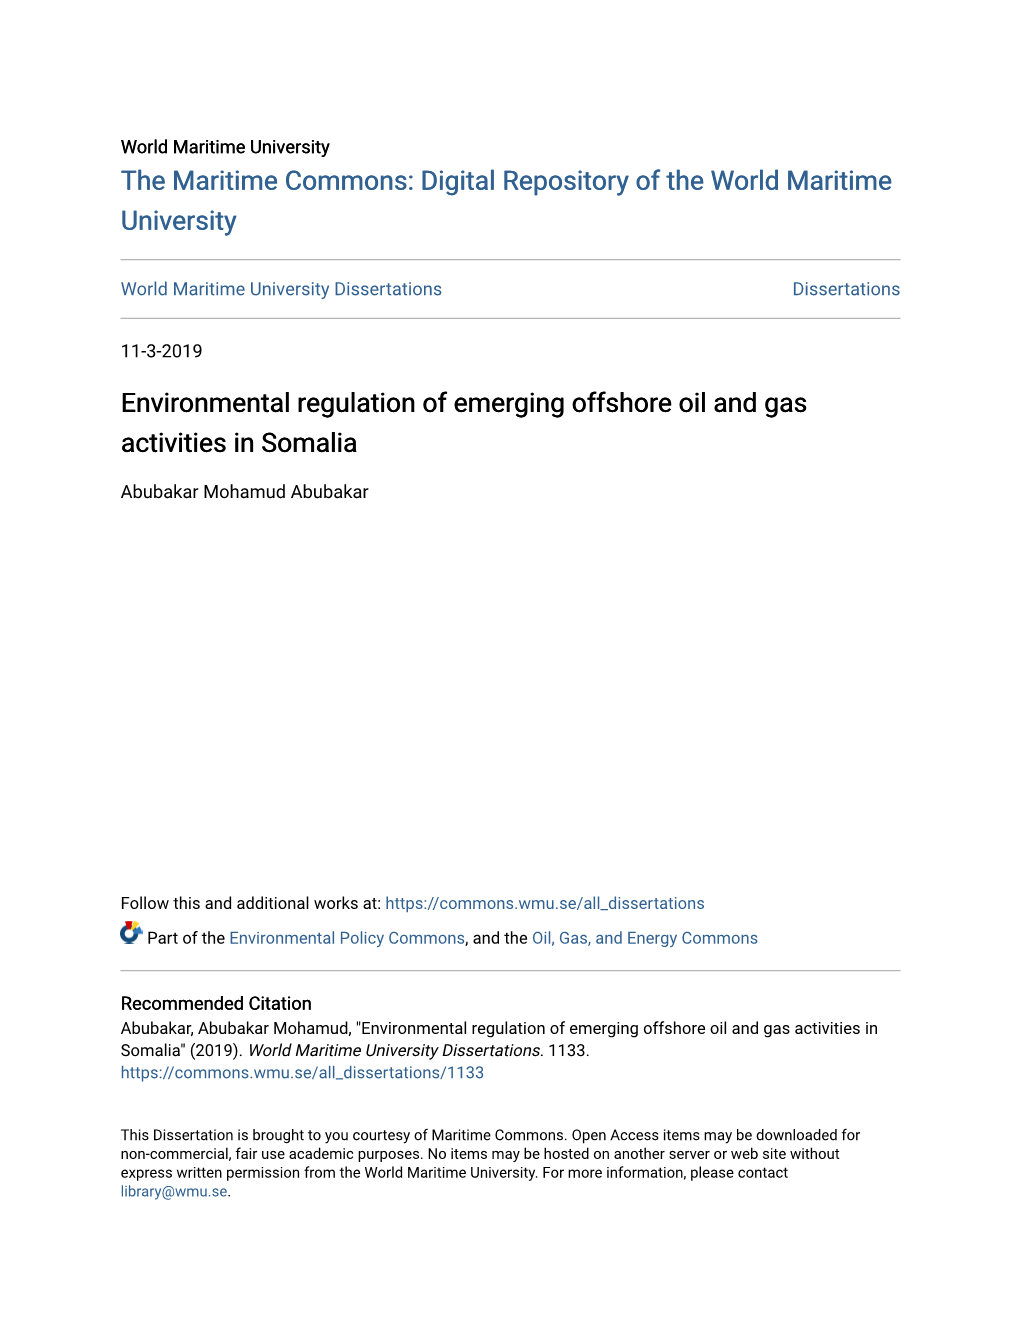 Environmental Regulation of Emerging Offshore Oil and Gas Activities in Somalia